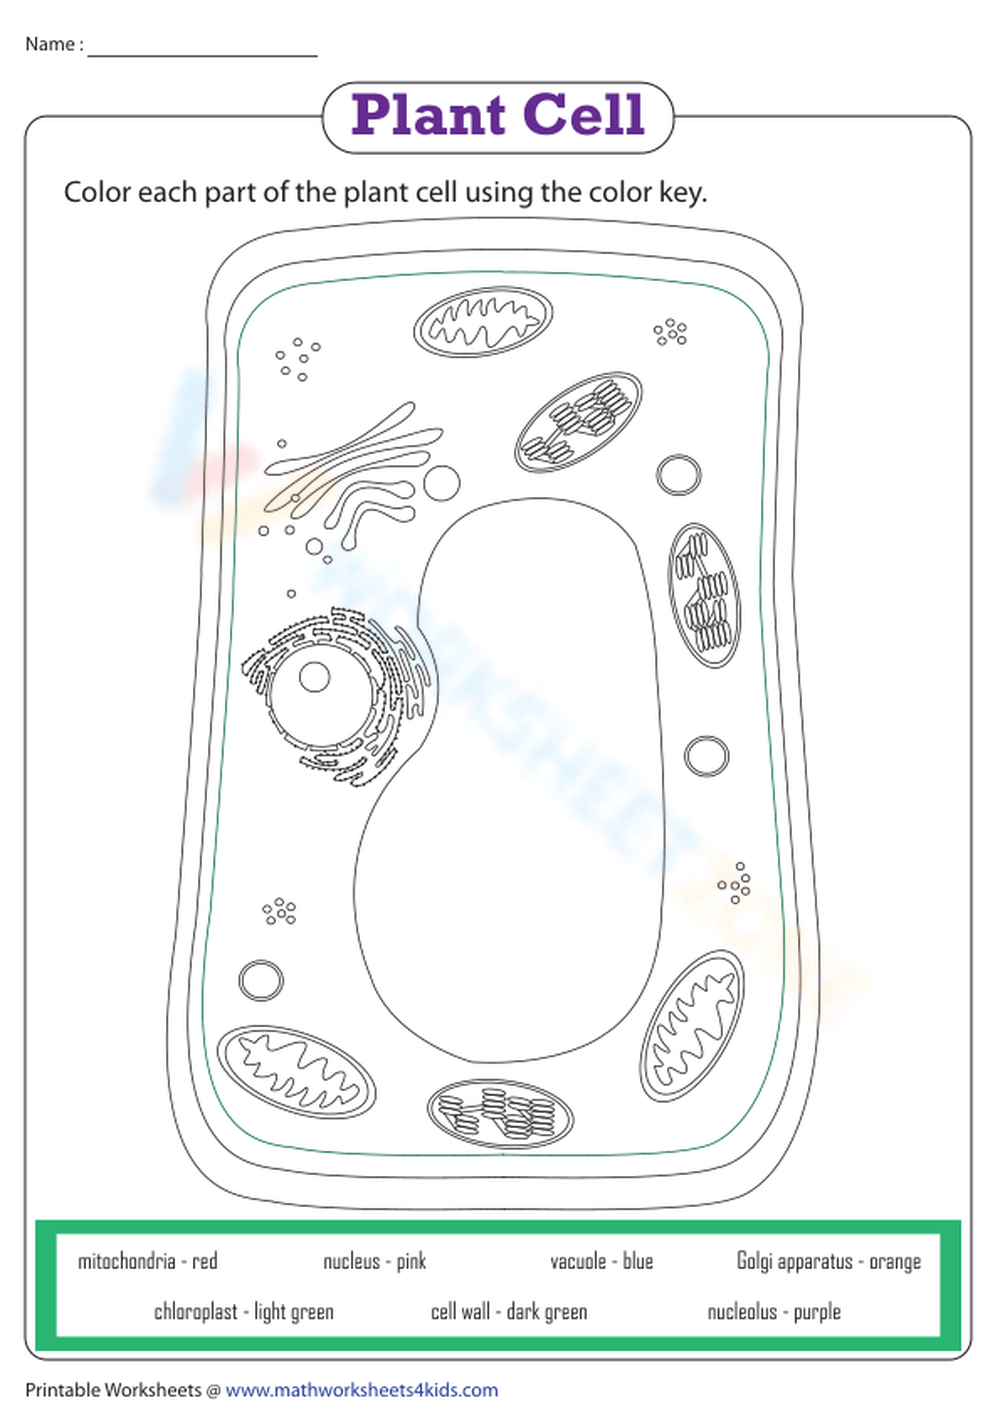 Plant cell anelles coloring worksheet